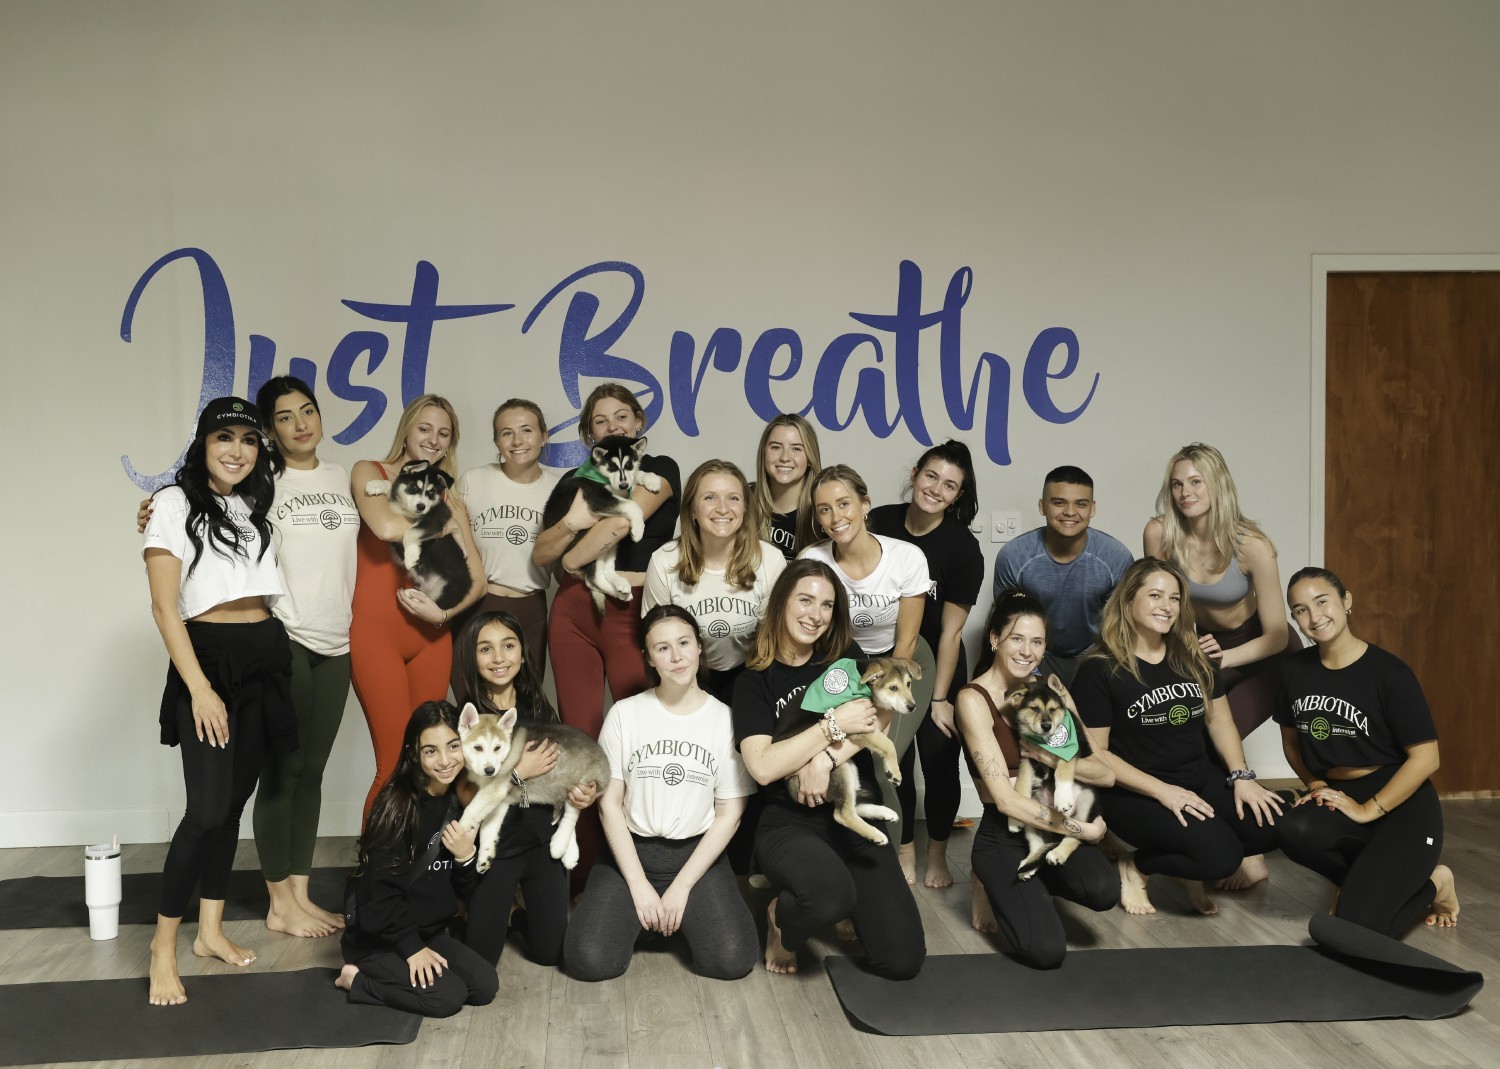 Cymbiotika team members at a fundraising yoga event for an animal rescue.